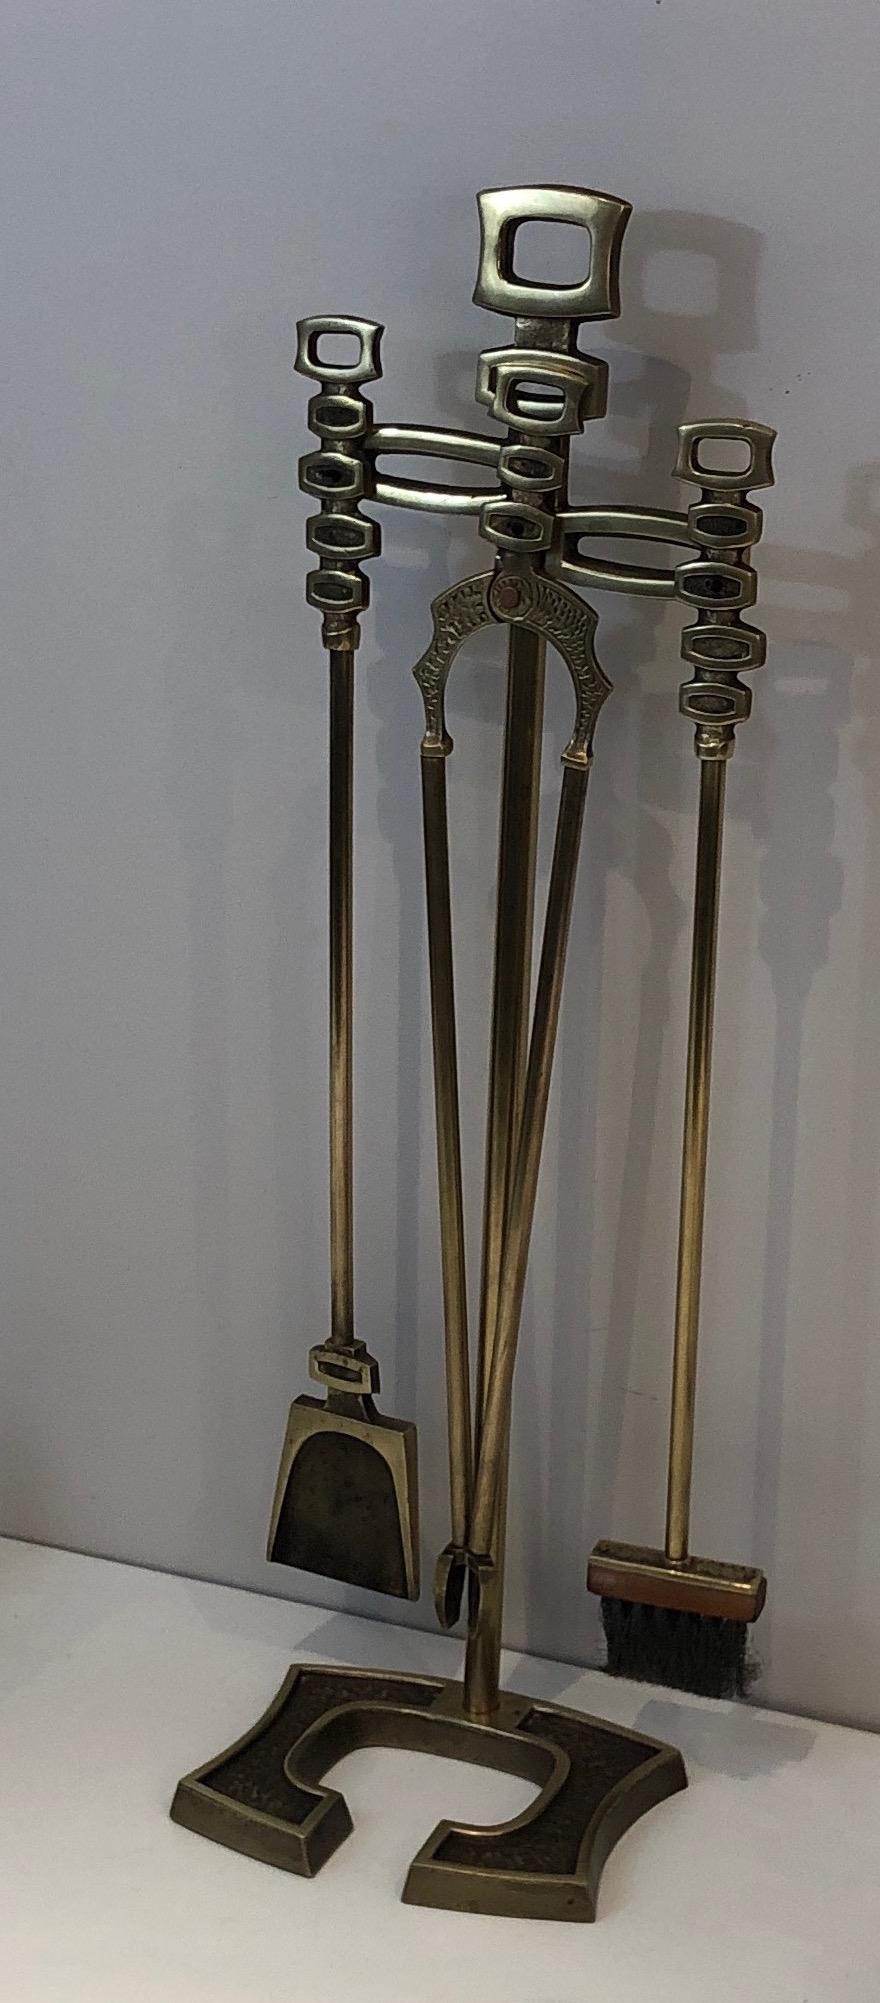 This very nice modernist fireplace tools set on stand is made of brass. This is an Italian work, circa 1970.